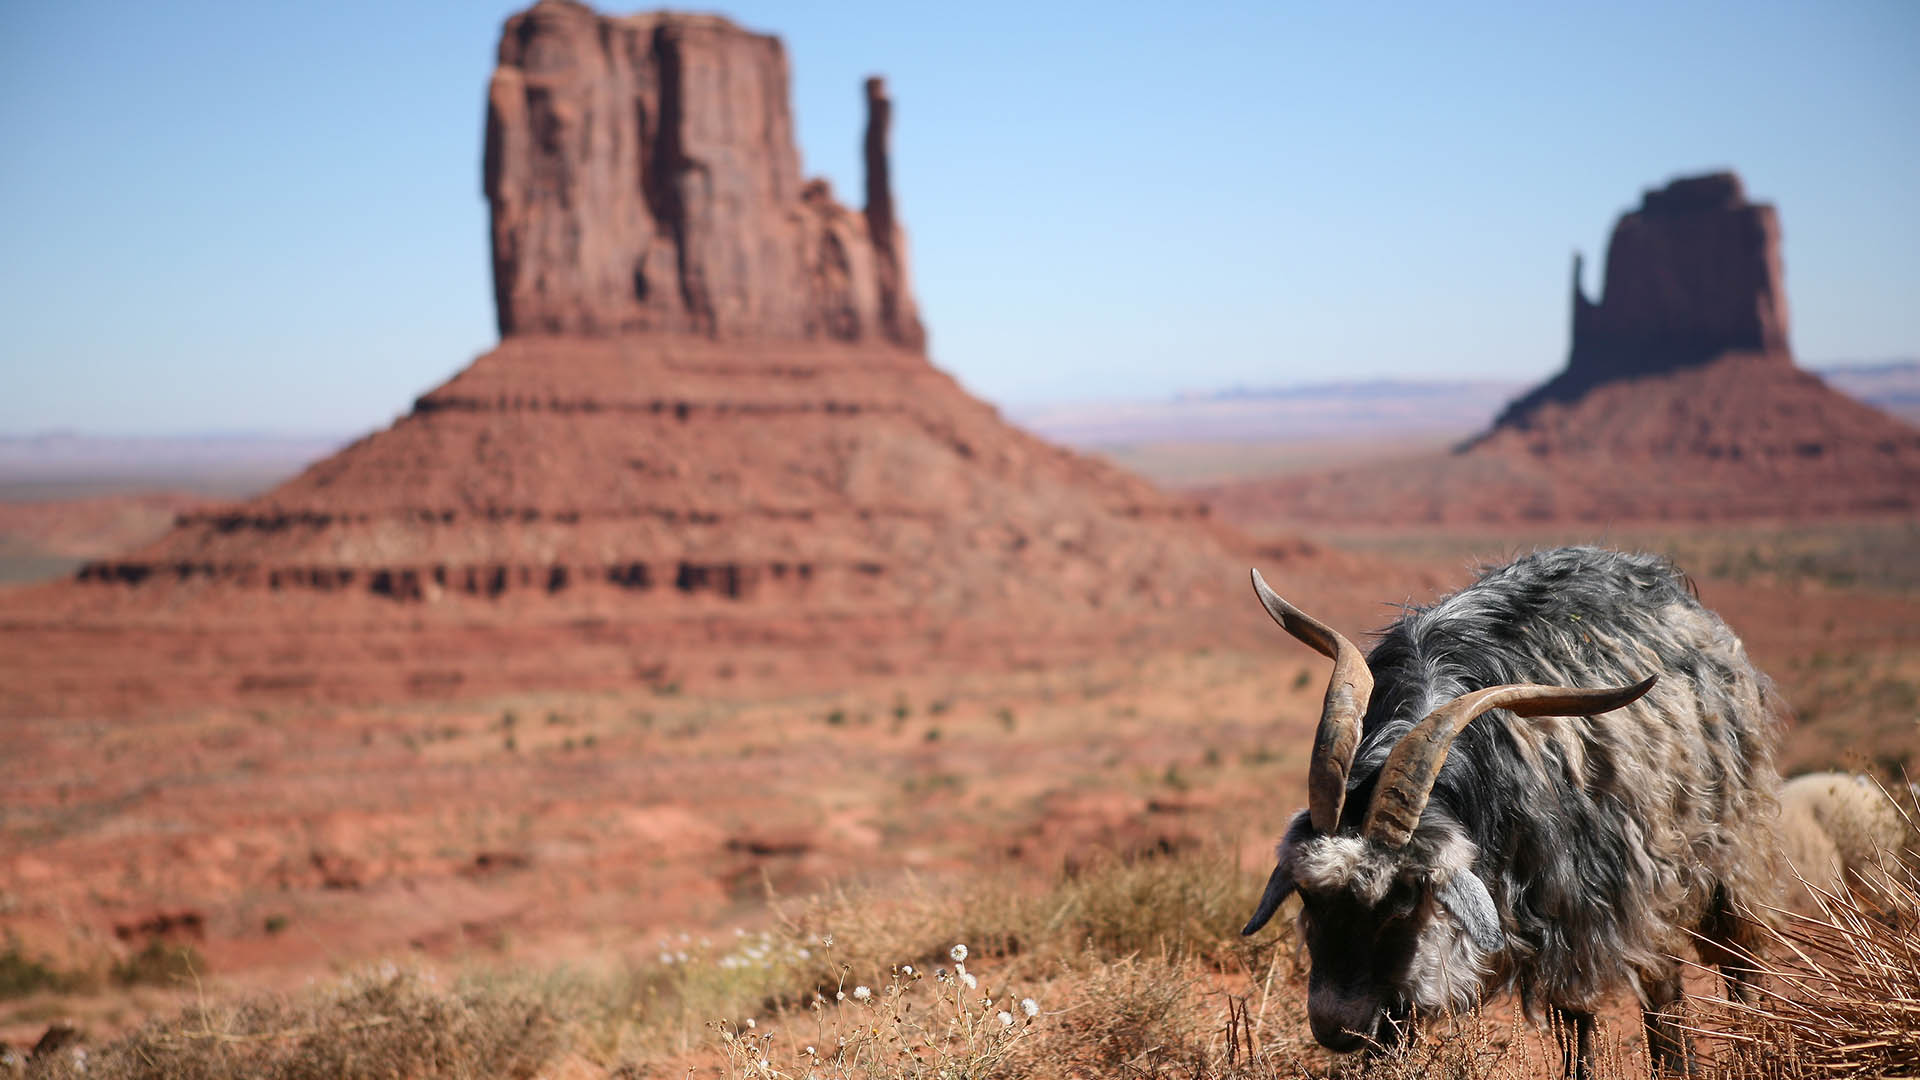 Mountain Sheep in Monument Valley